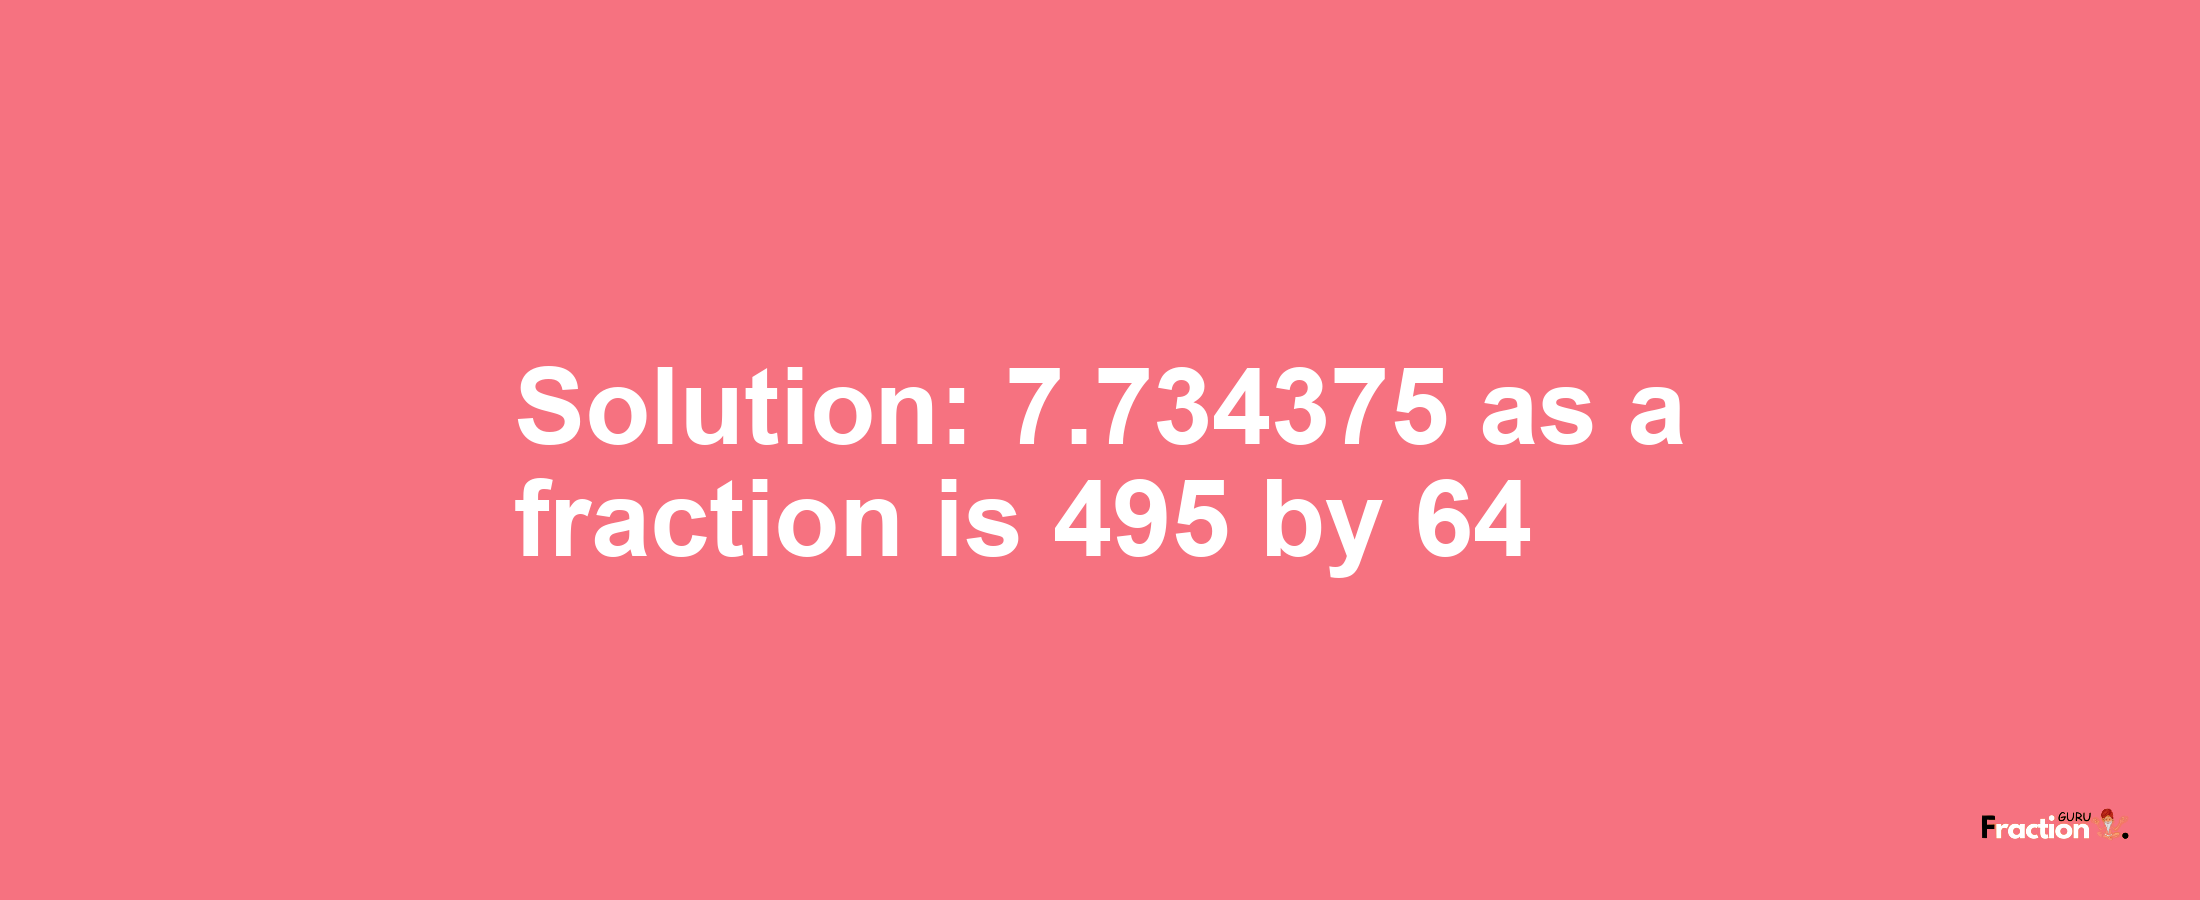 Solution:7.734375 as a fraction is 495/64